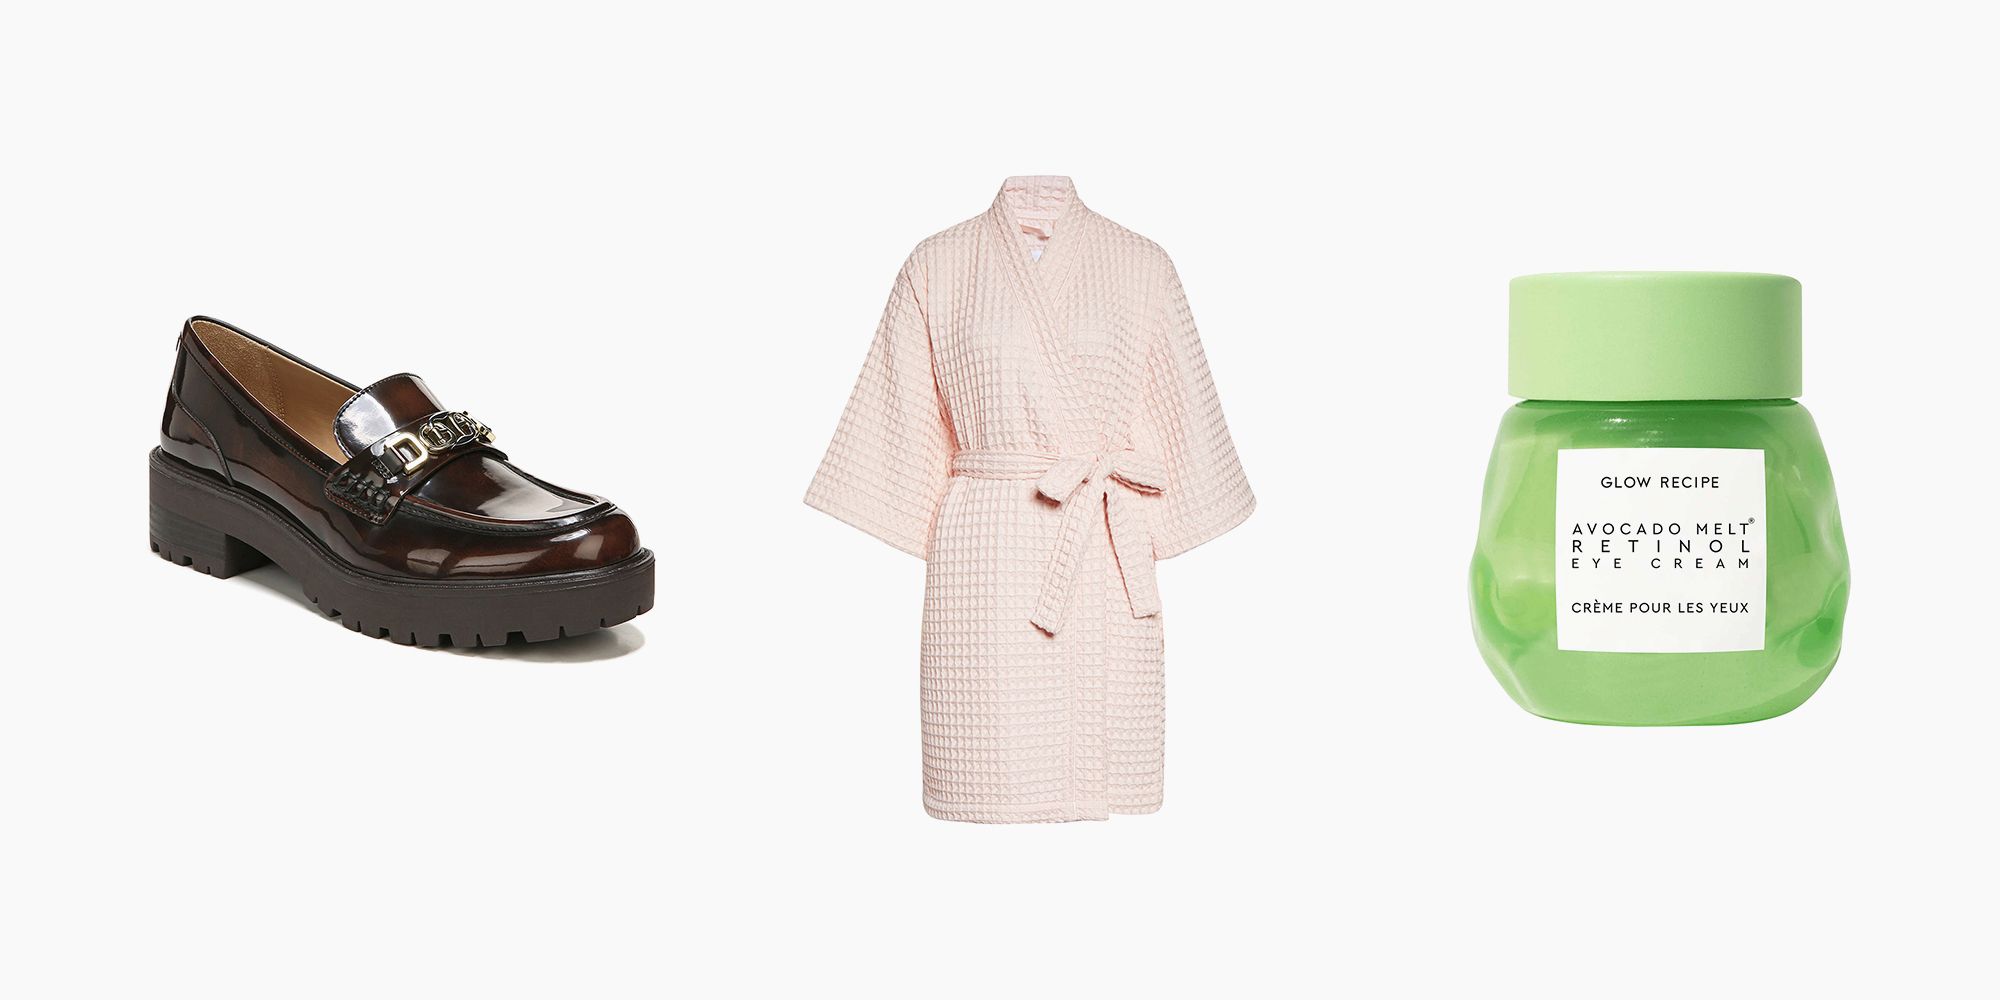 The 10 Things We're Shopping From Google's Holiday 100 List